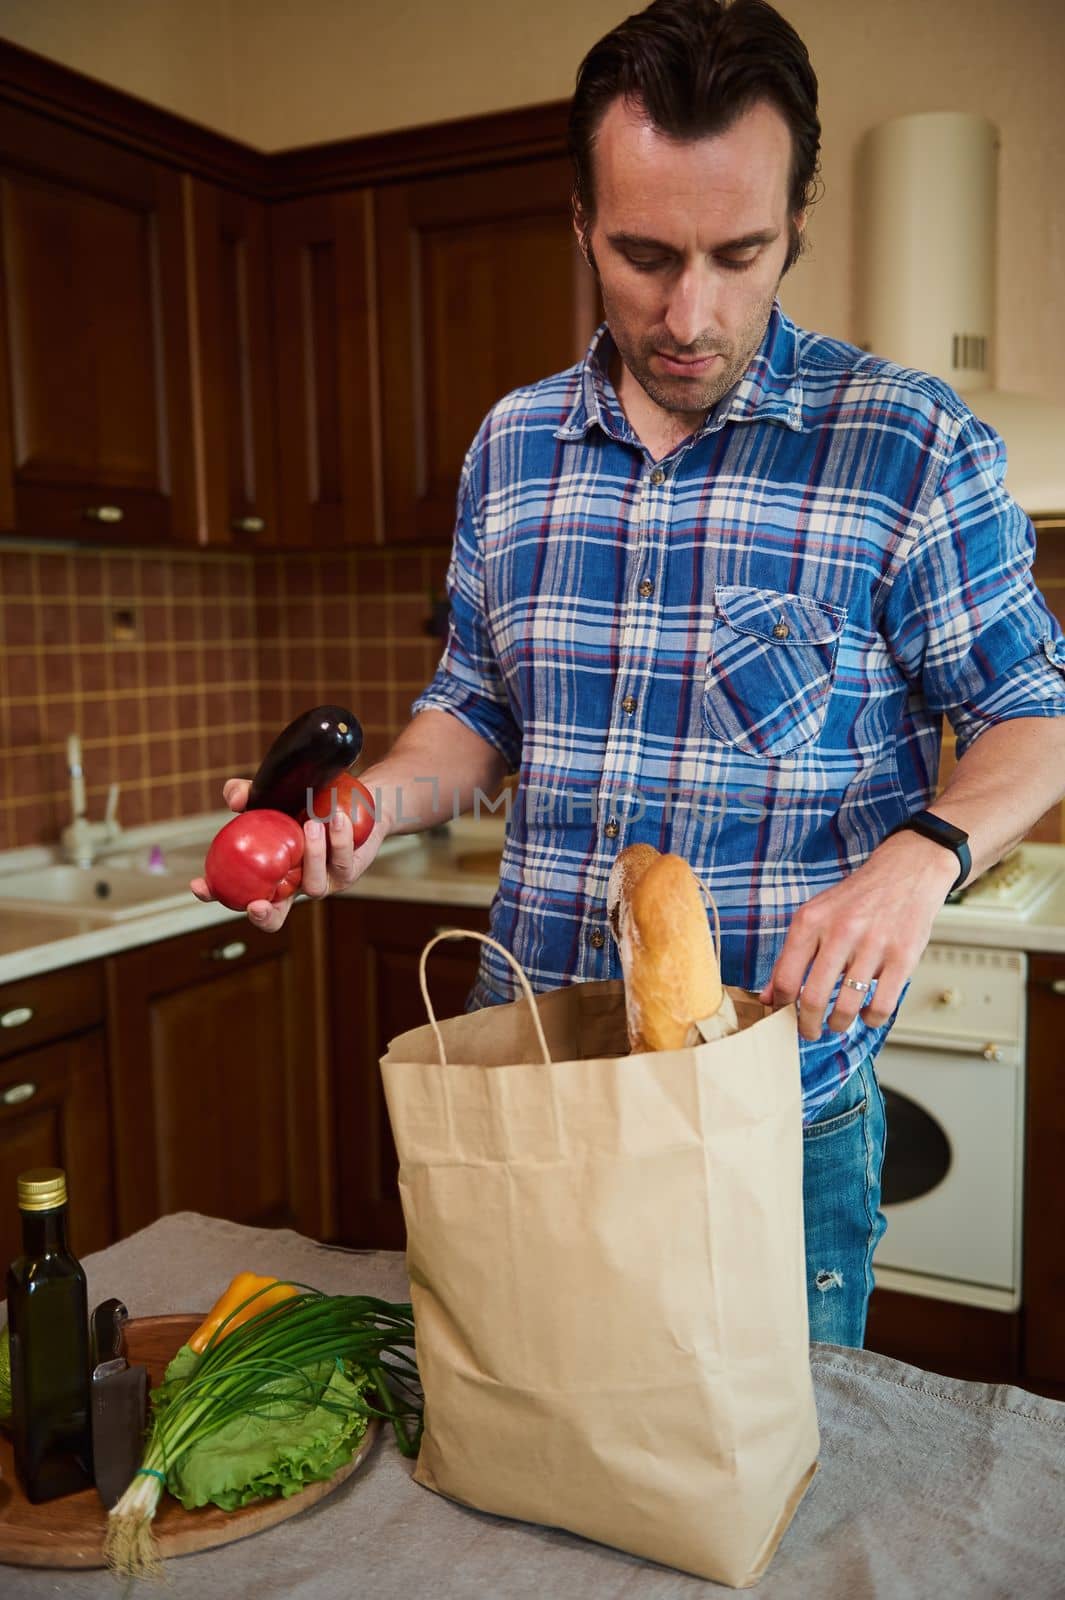 Charming handsome middle-aged Caucasian man lays out purchases in his cozy wooden home kitchen, sorting vegetables and fresh greens while unpacking a grocery shopping bag